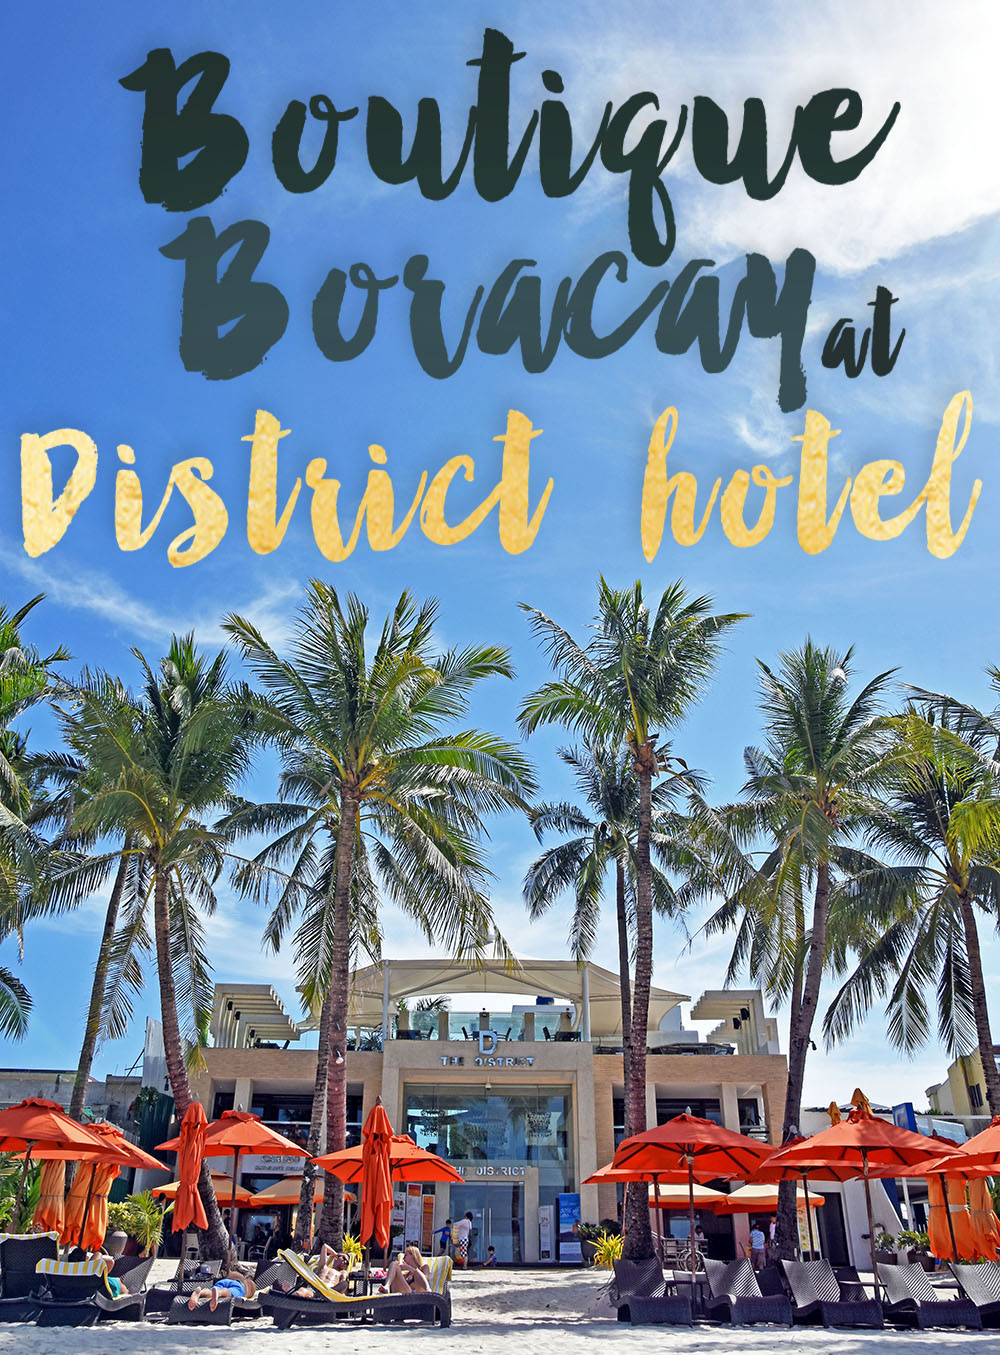 Boutique Boracay at District Hotel @seattlestravels